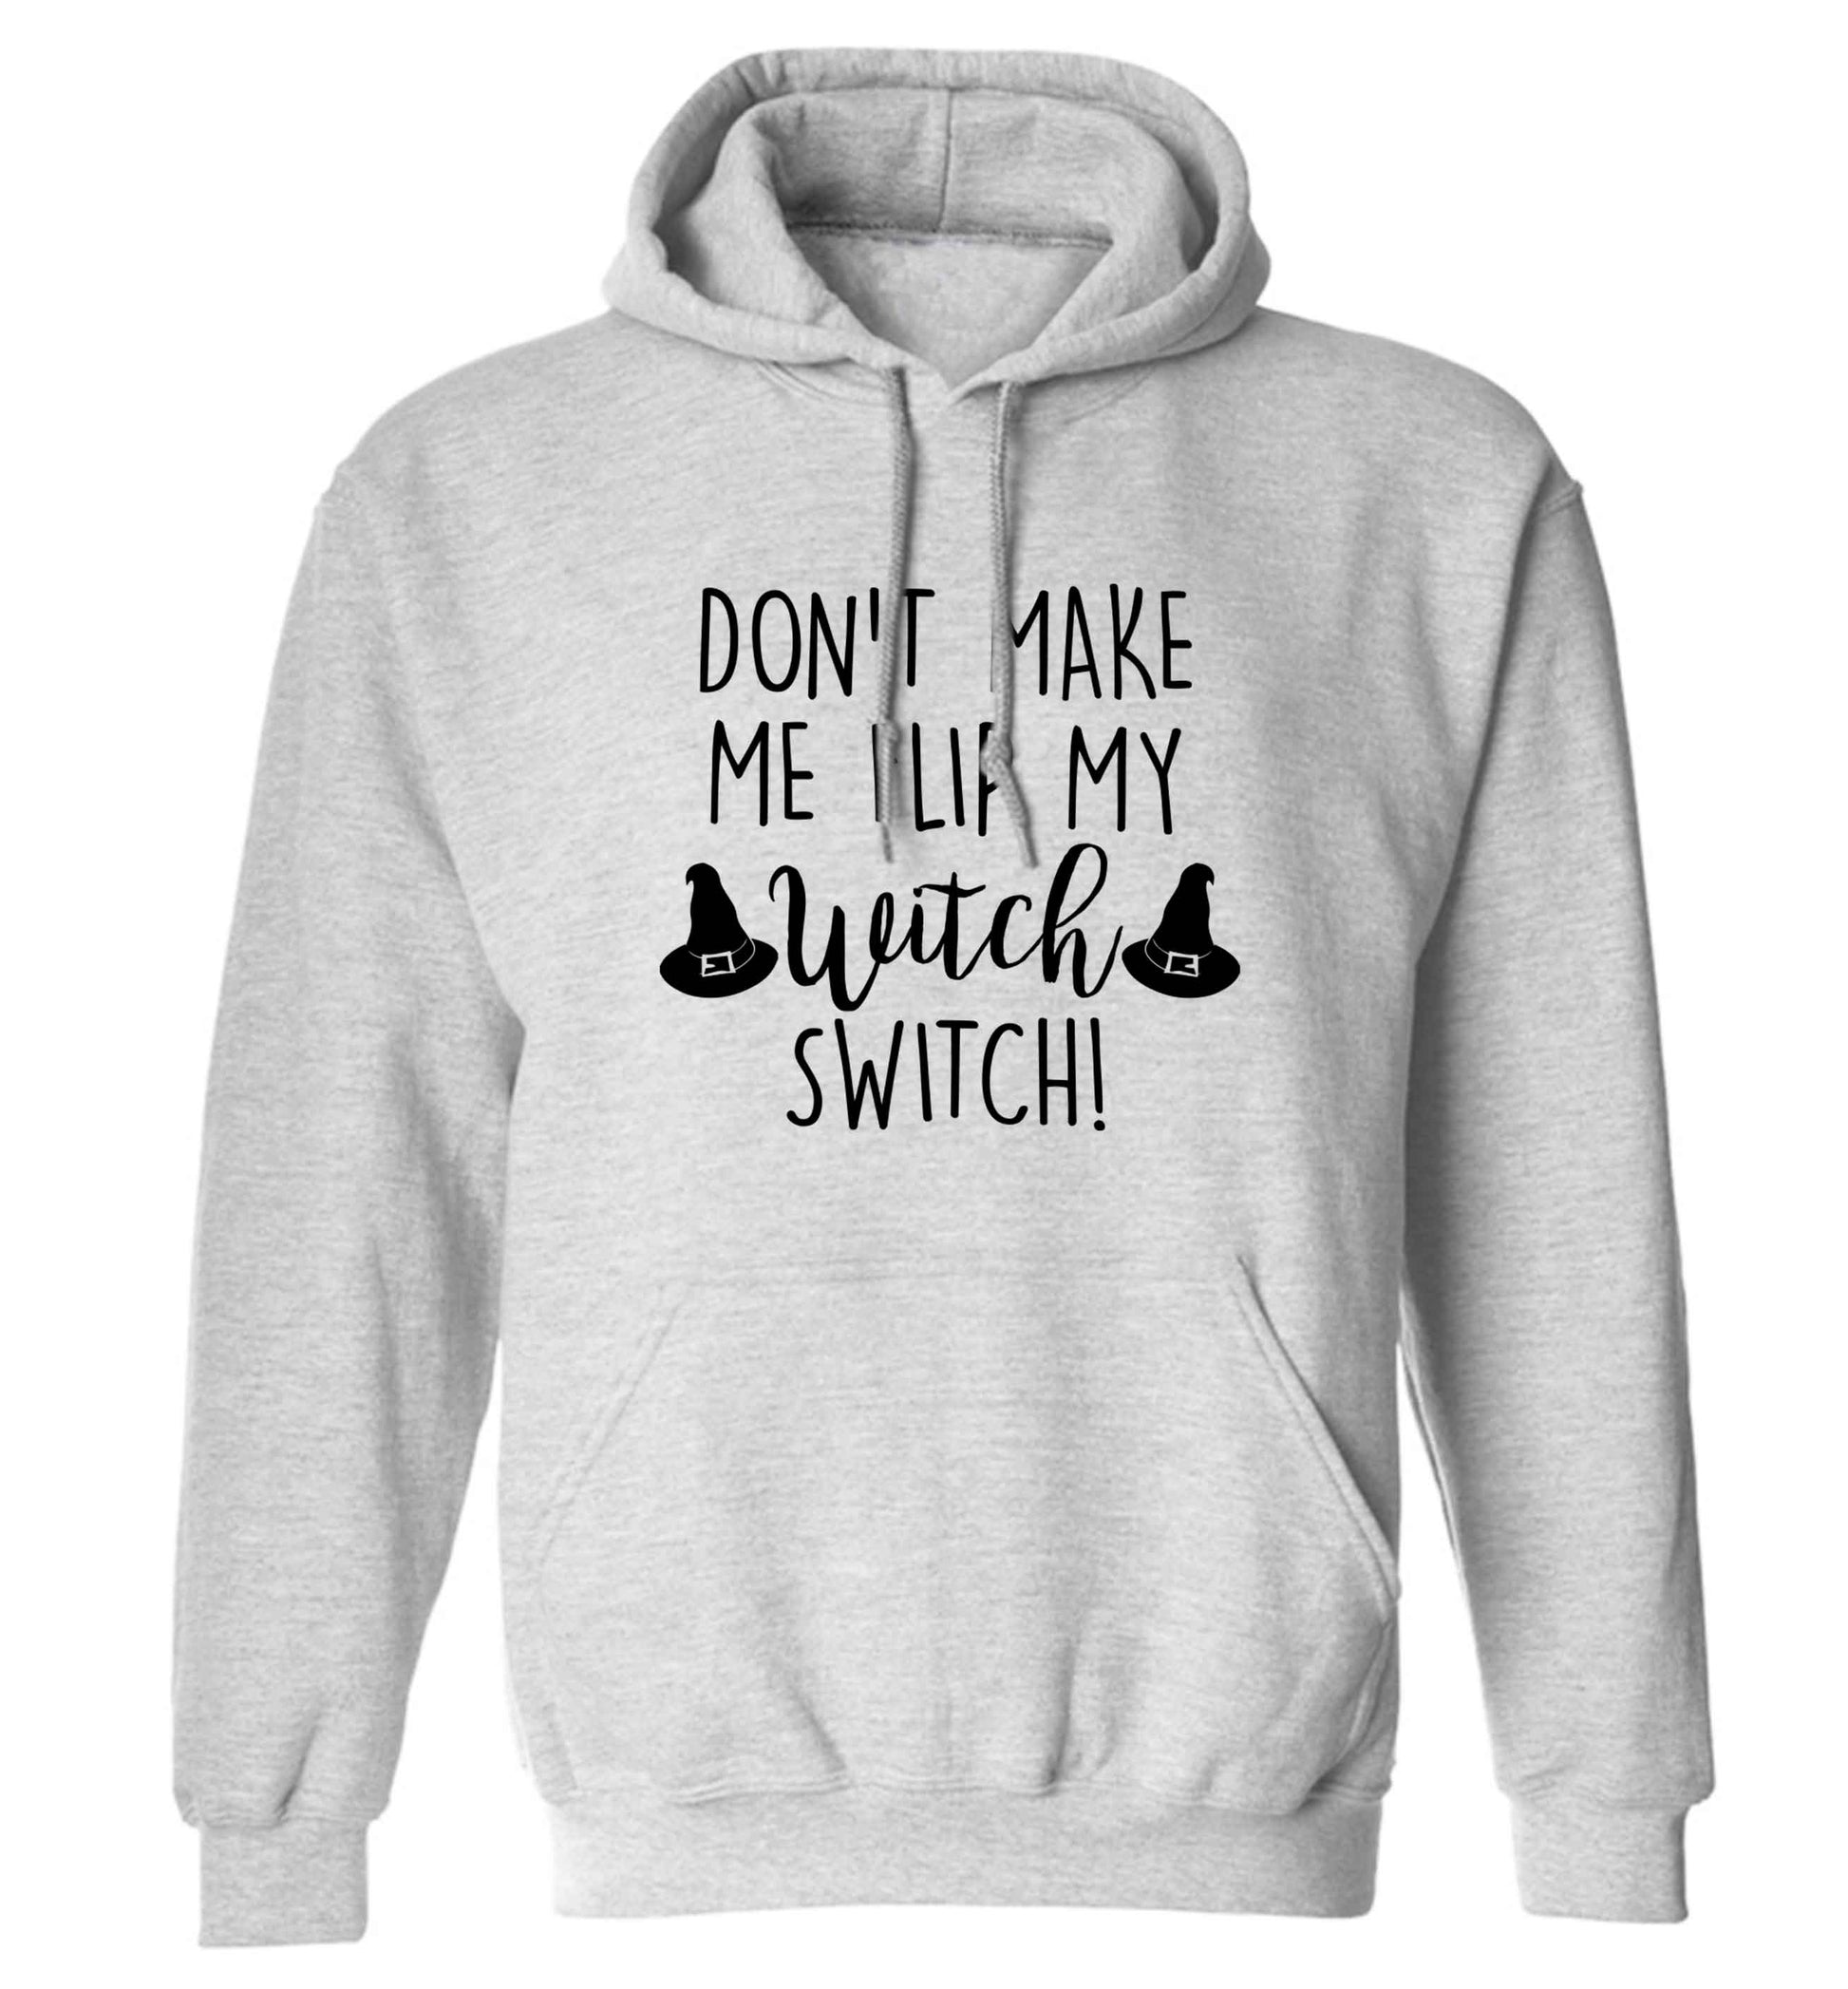 Don't make me flip my witch switch adults unisex grey hoodie 2XL